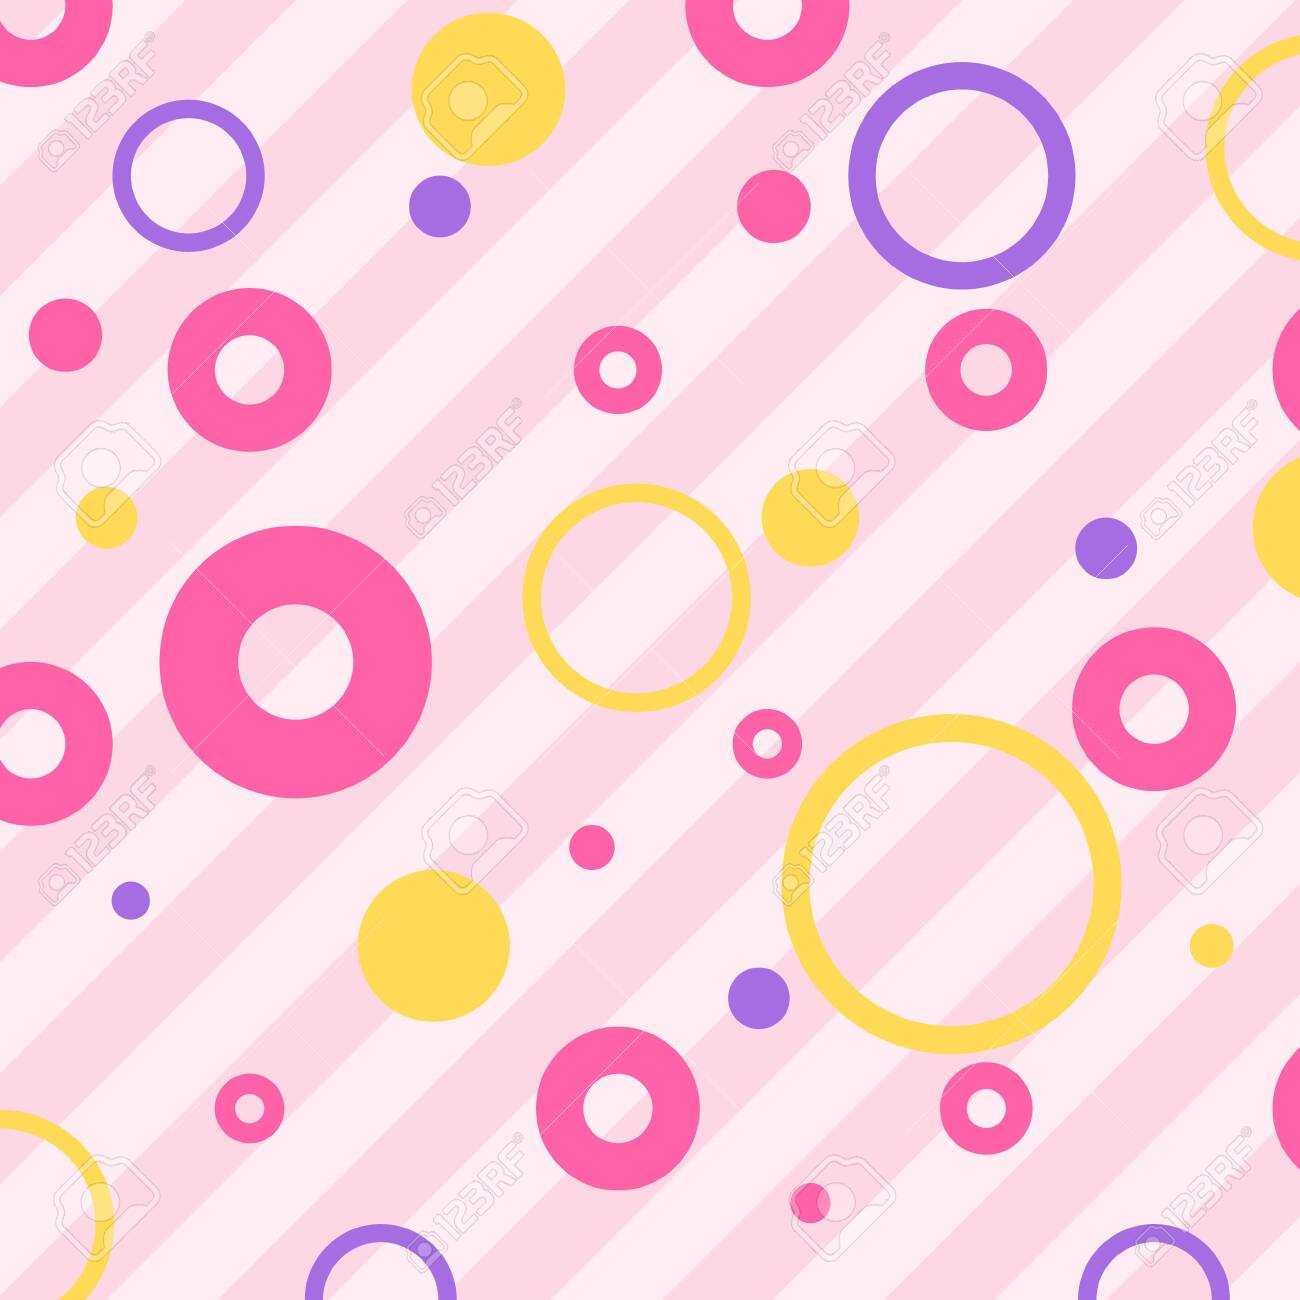 Endless Background With Circles Cute Romantic Pink Vector